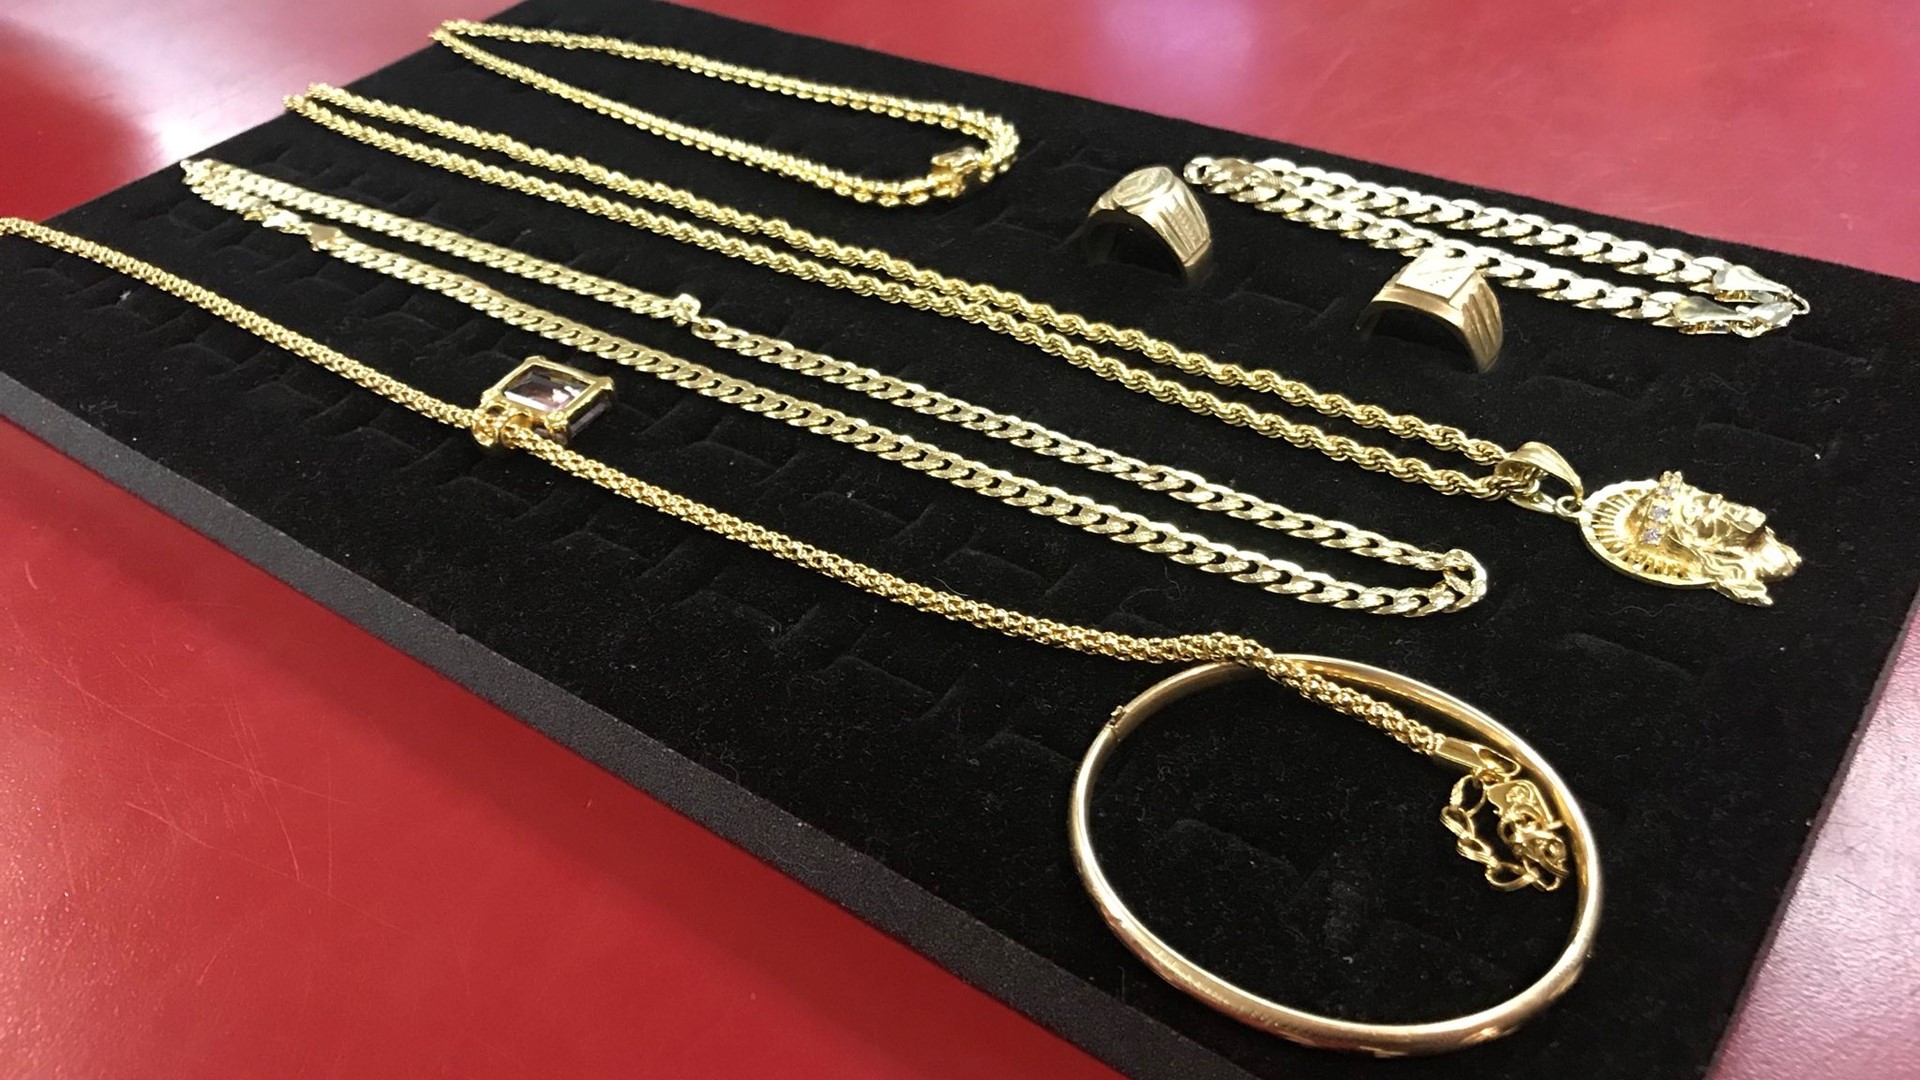 The Loyalty Pawn shop says they see at least 10 pieces of fake gold jewelry a week being brought in from people that may have fallen victim to a possible scheme.